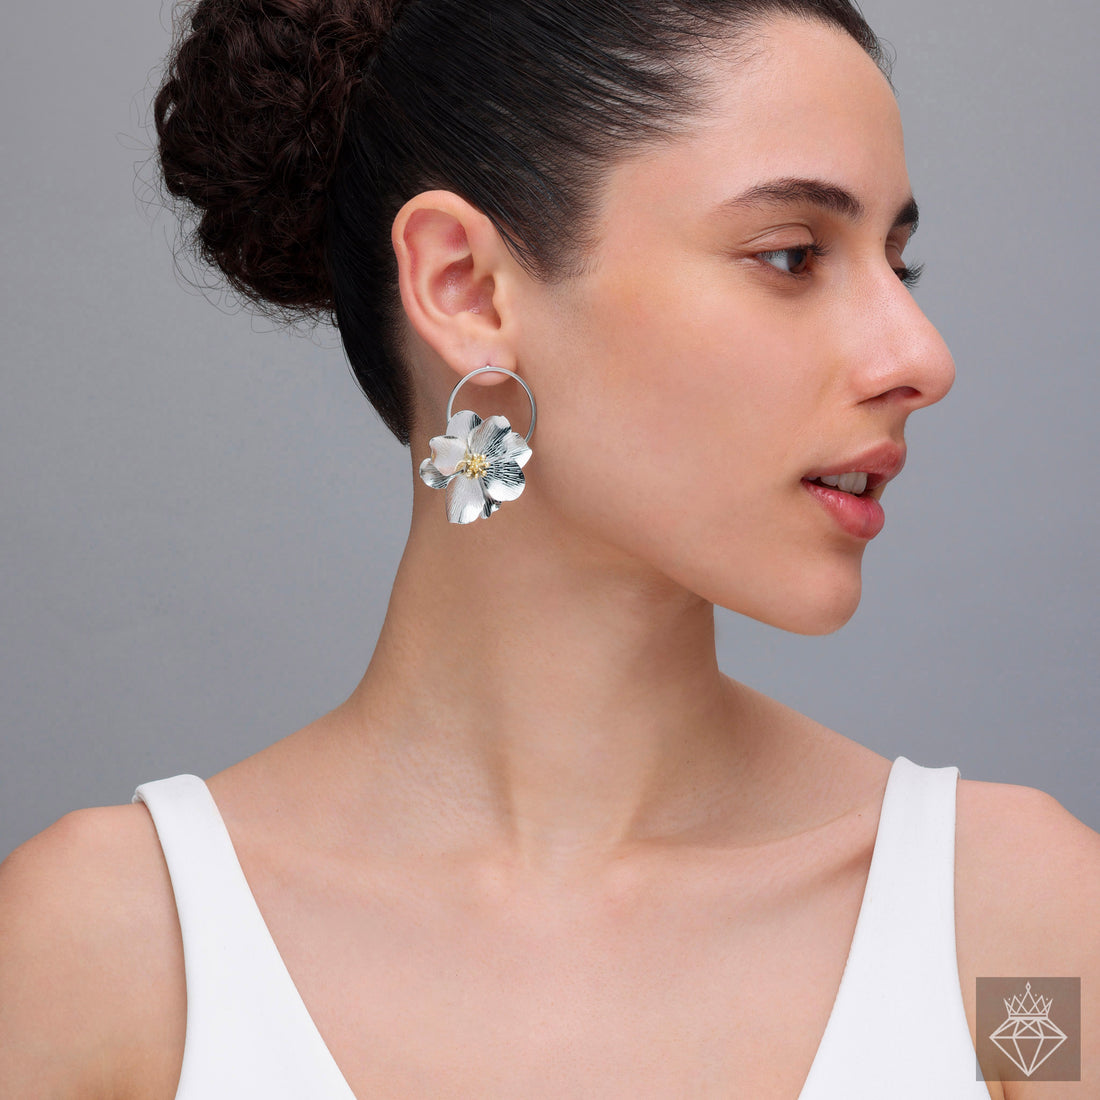 Ring of Petals: Bold Statement Earrings By PRAO